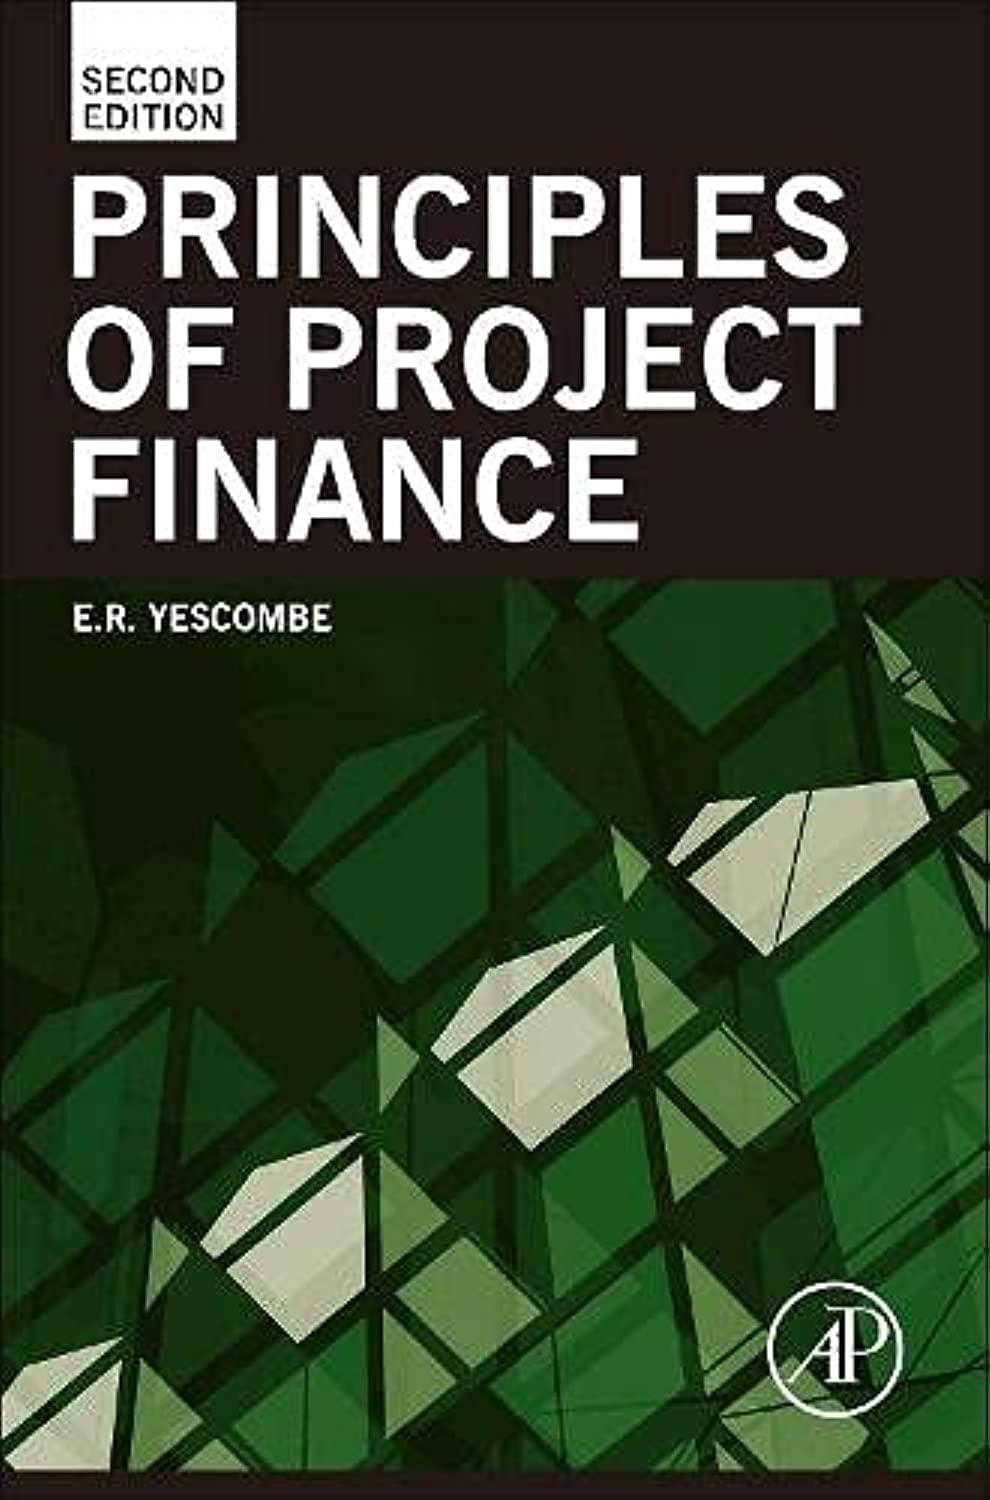 principles of project finance 2nd edition e. r. yescombe 0123910587, 9780123910585